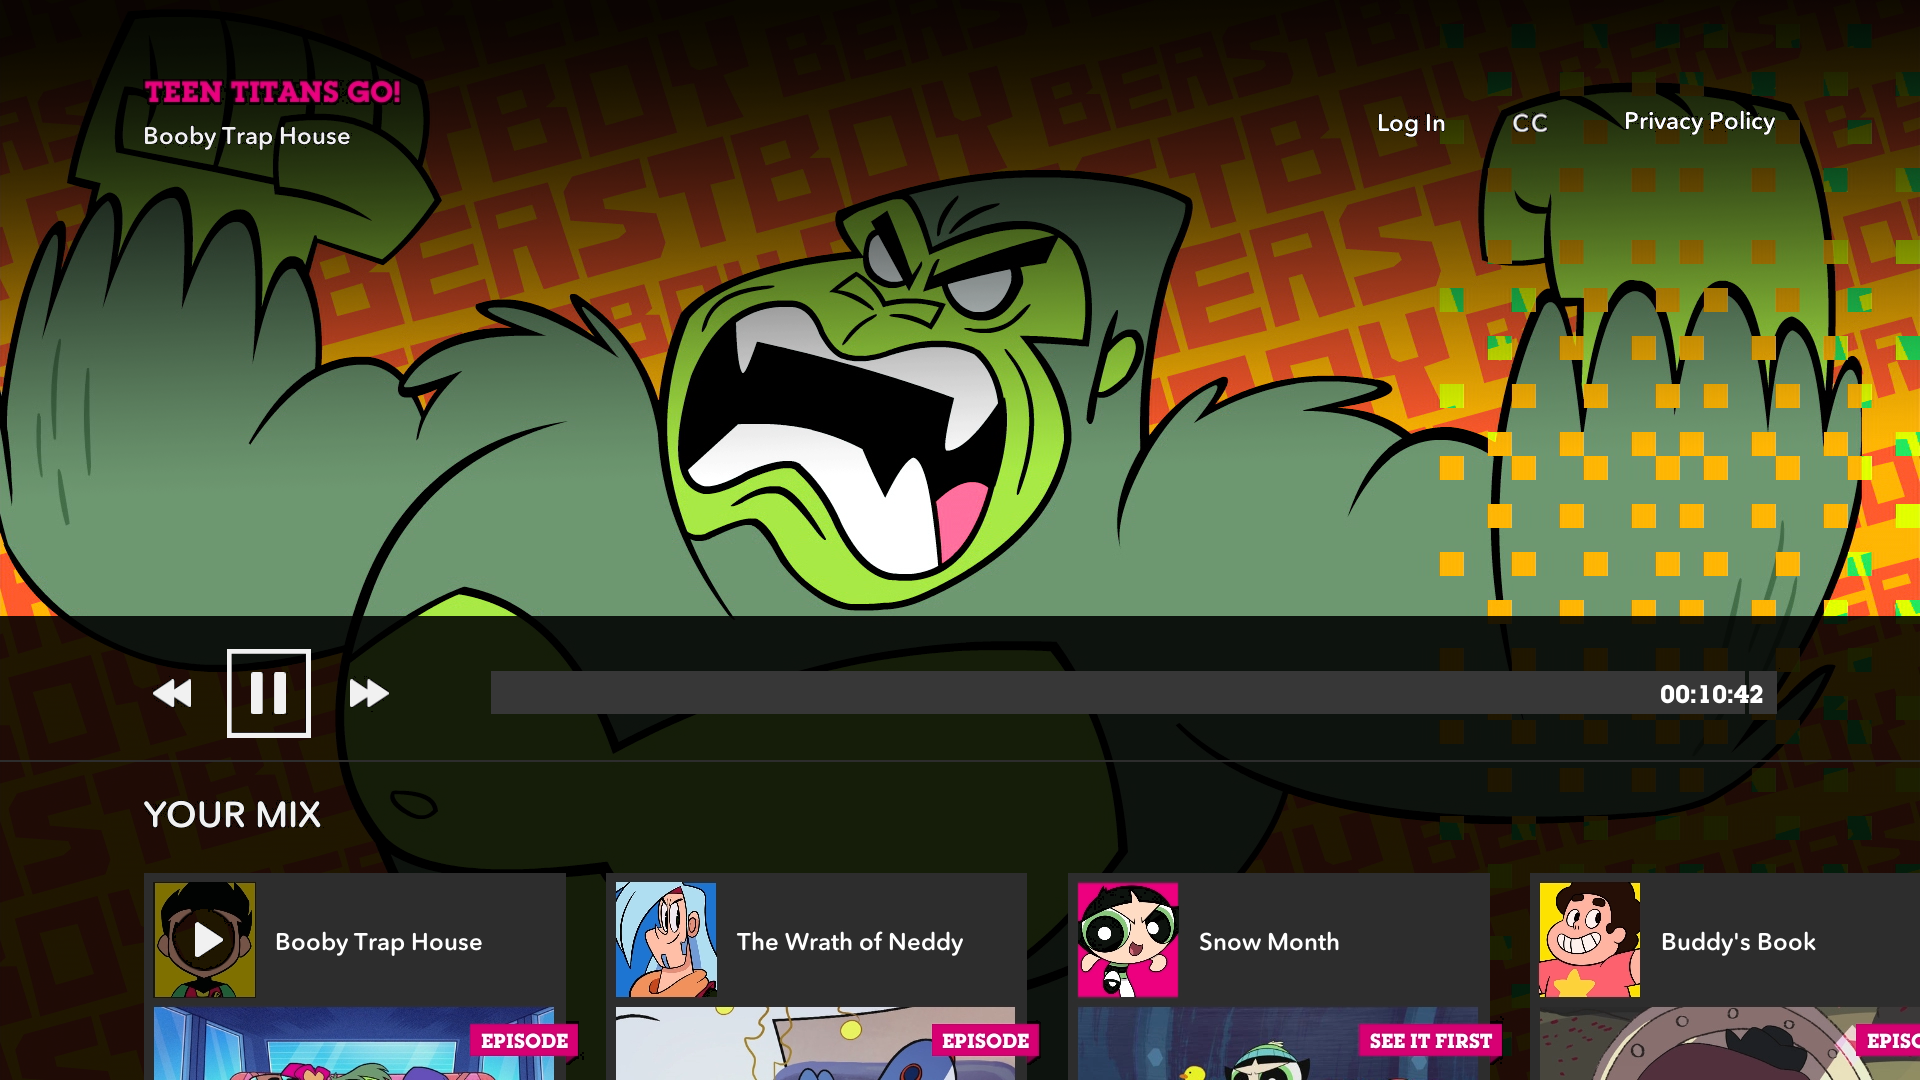 Watch Cartoons and Play Games at the Same Time With Cartoon Network 2.0